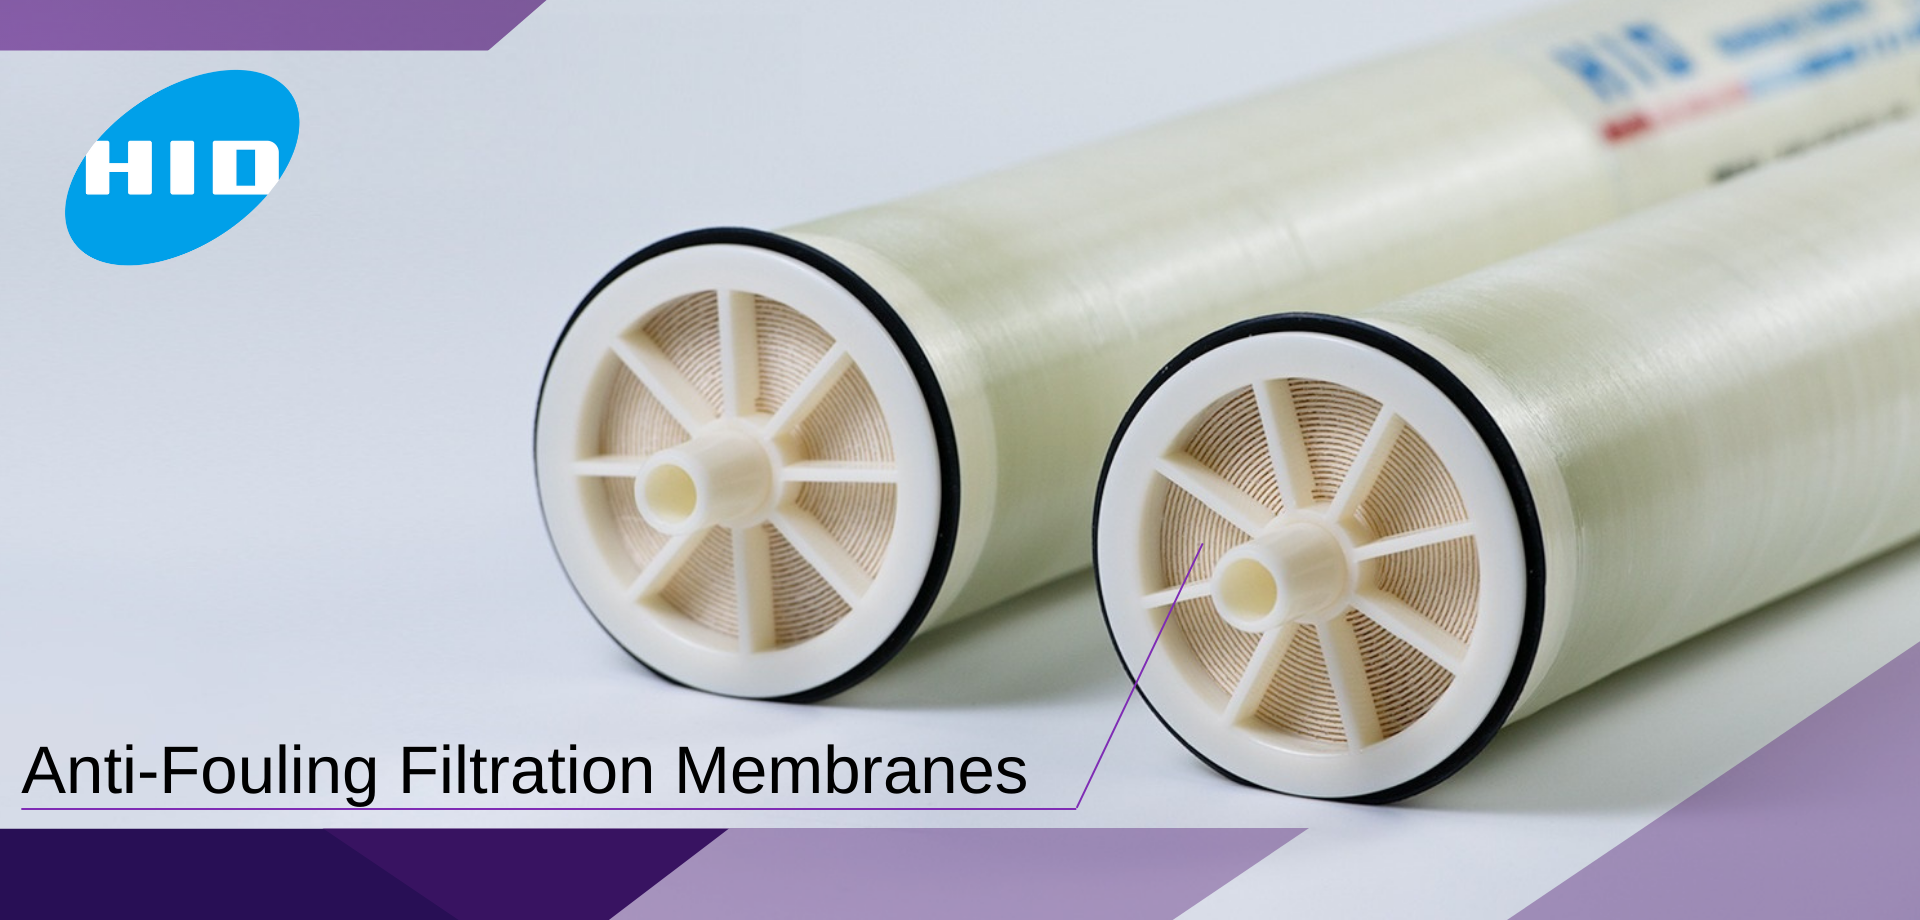 Anti-Fouling Filtration Membranes